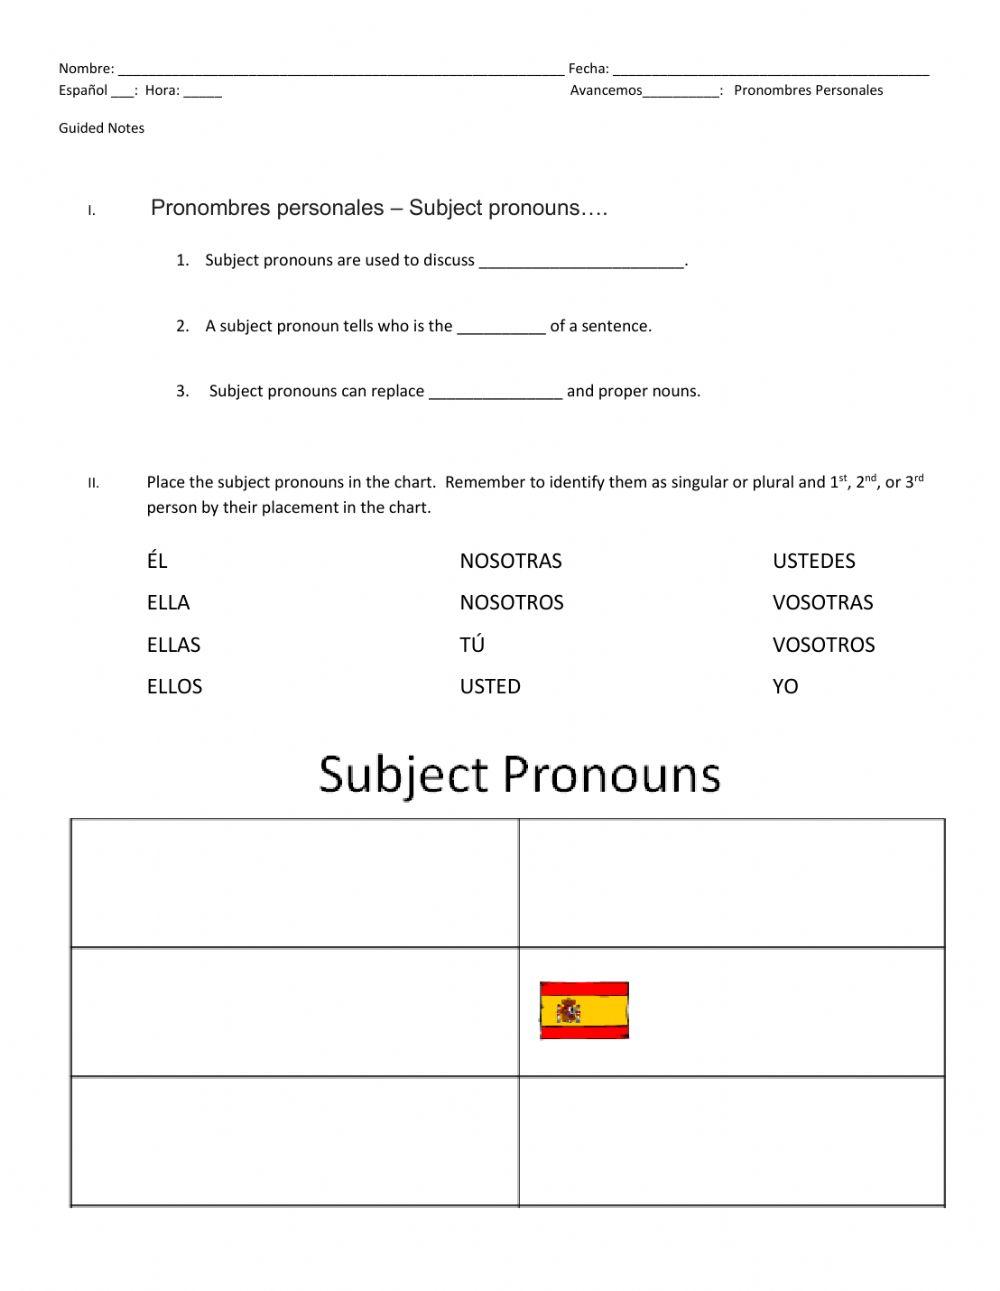 Subject pronouns guided notes 01